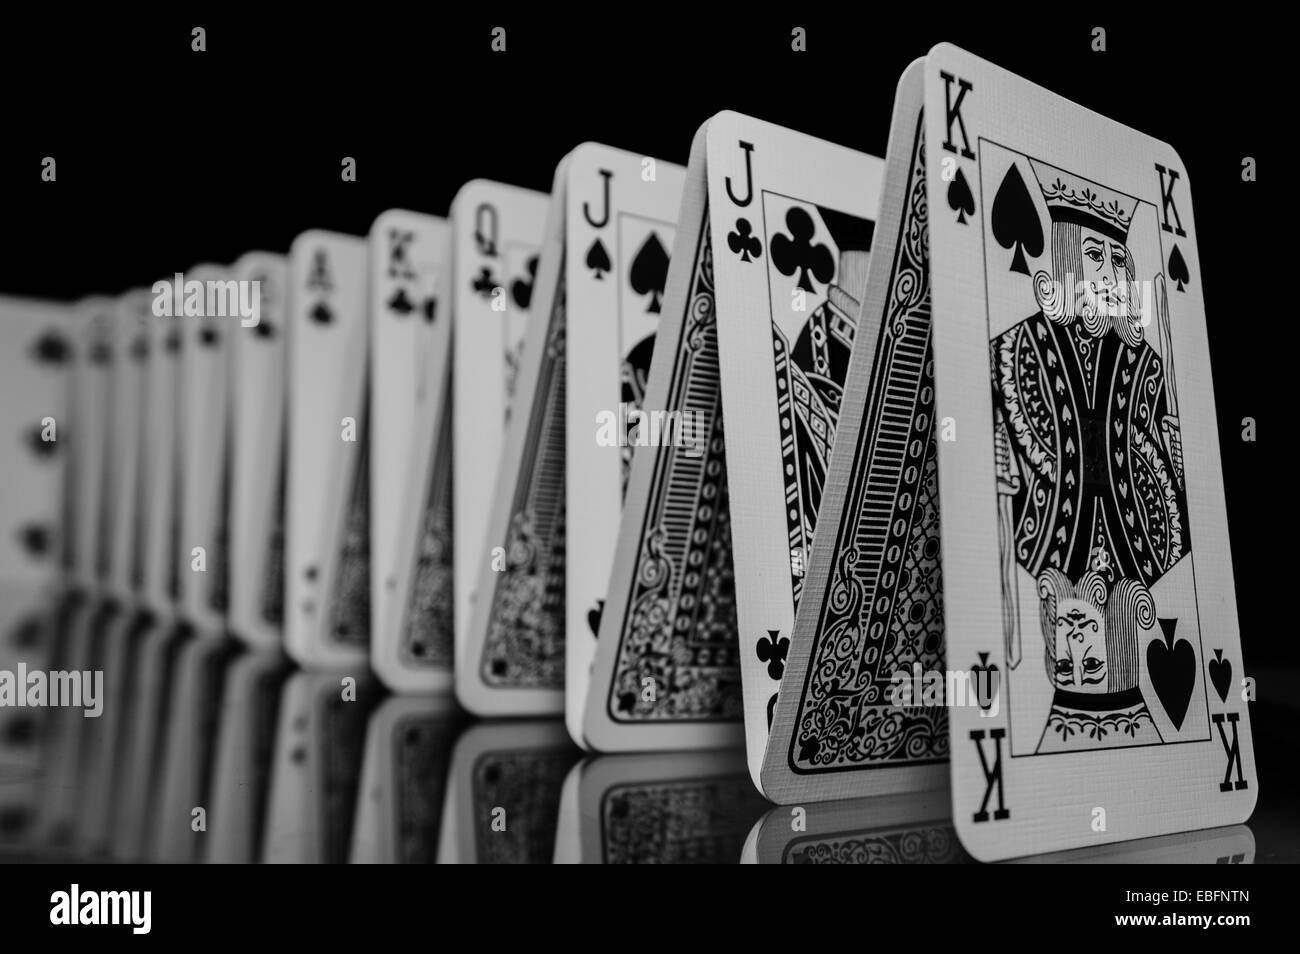 Playing cards Black and White Stock Photos & Images - Alamy